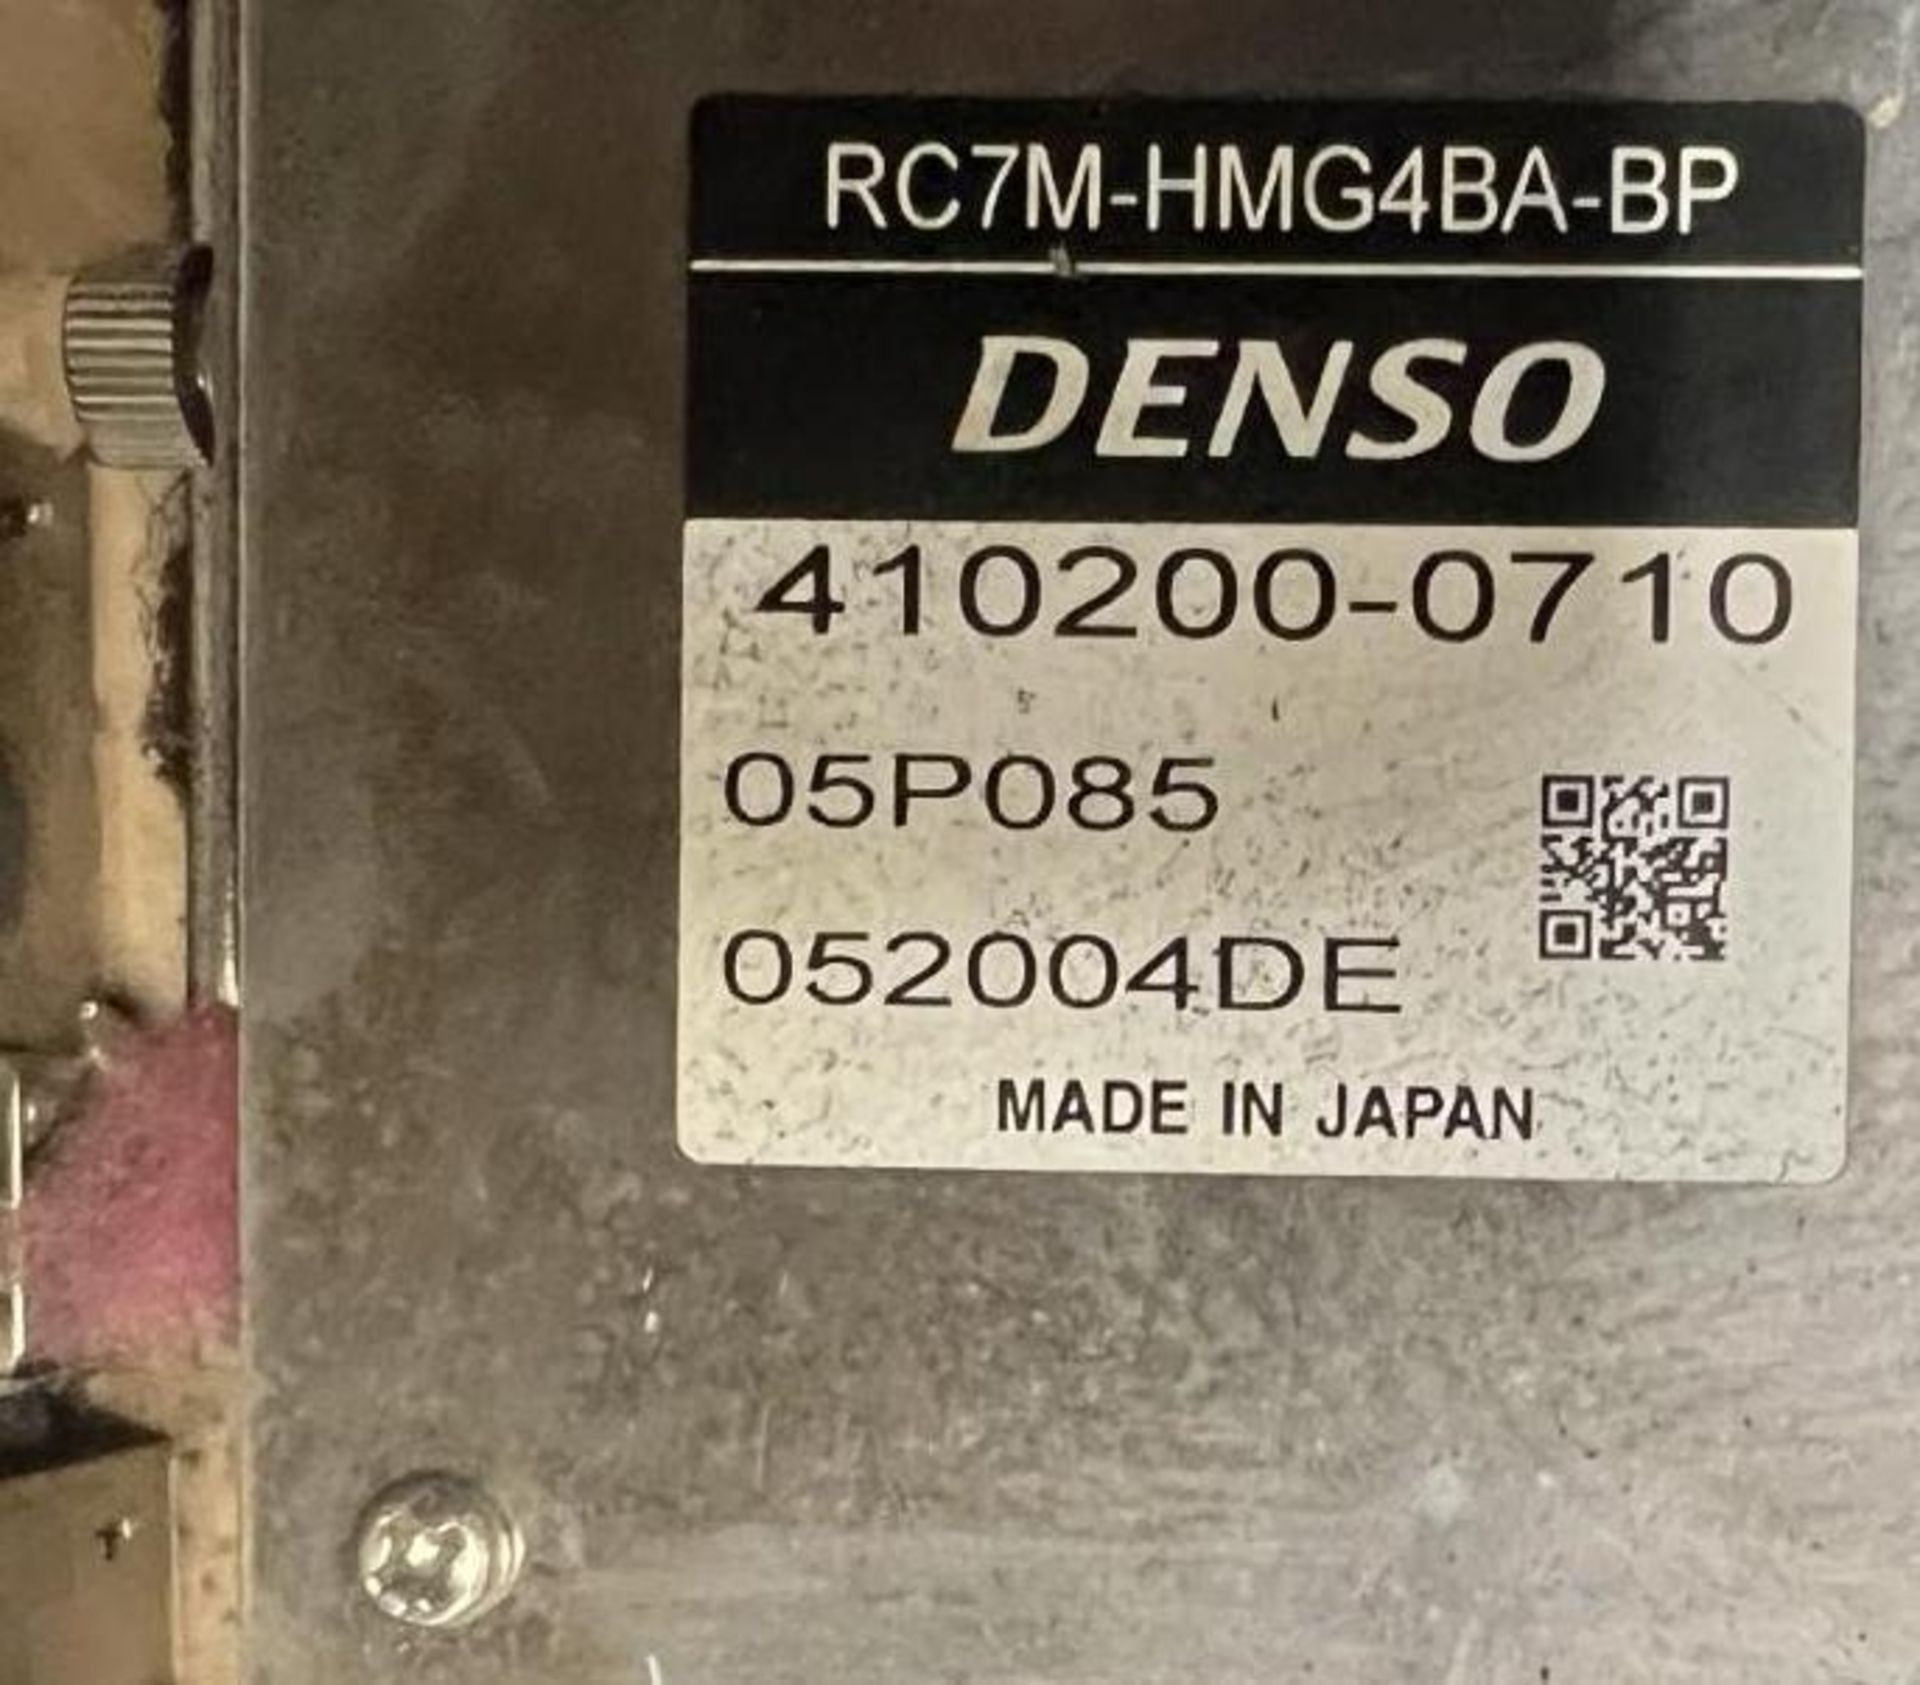 Lot of (4) Denso #RC7M-HMG4BA-BP / #410200-0710 Robot Controllers - Image 6 of 6